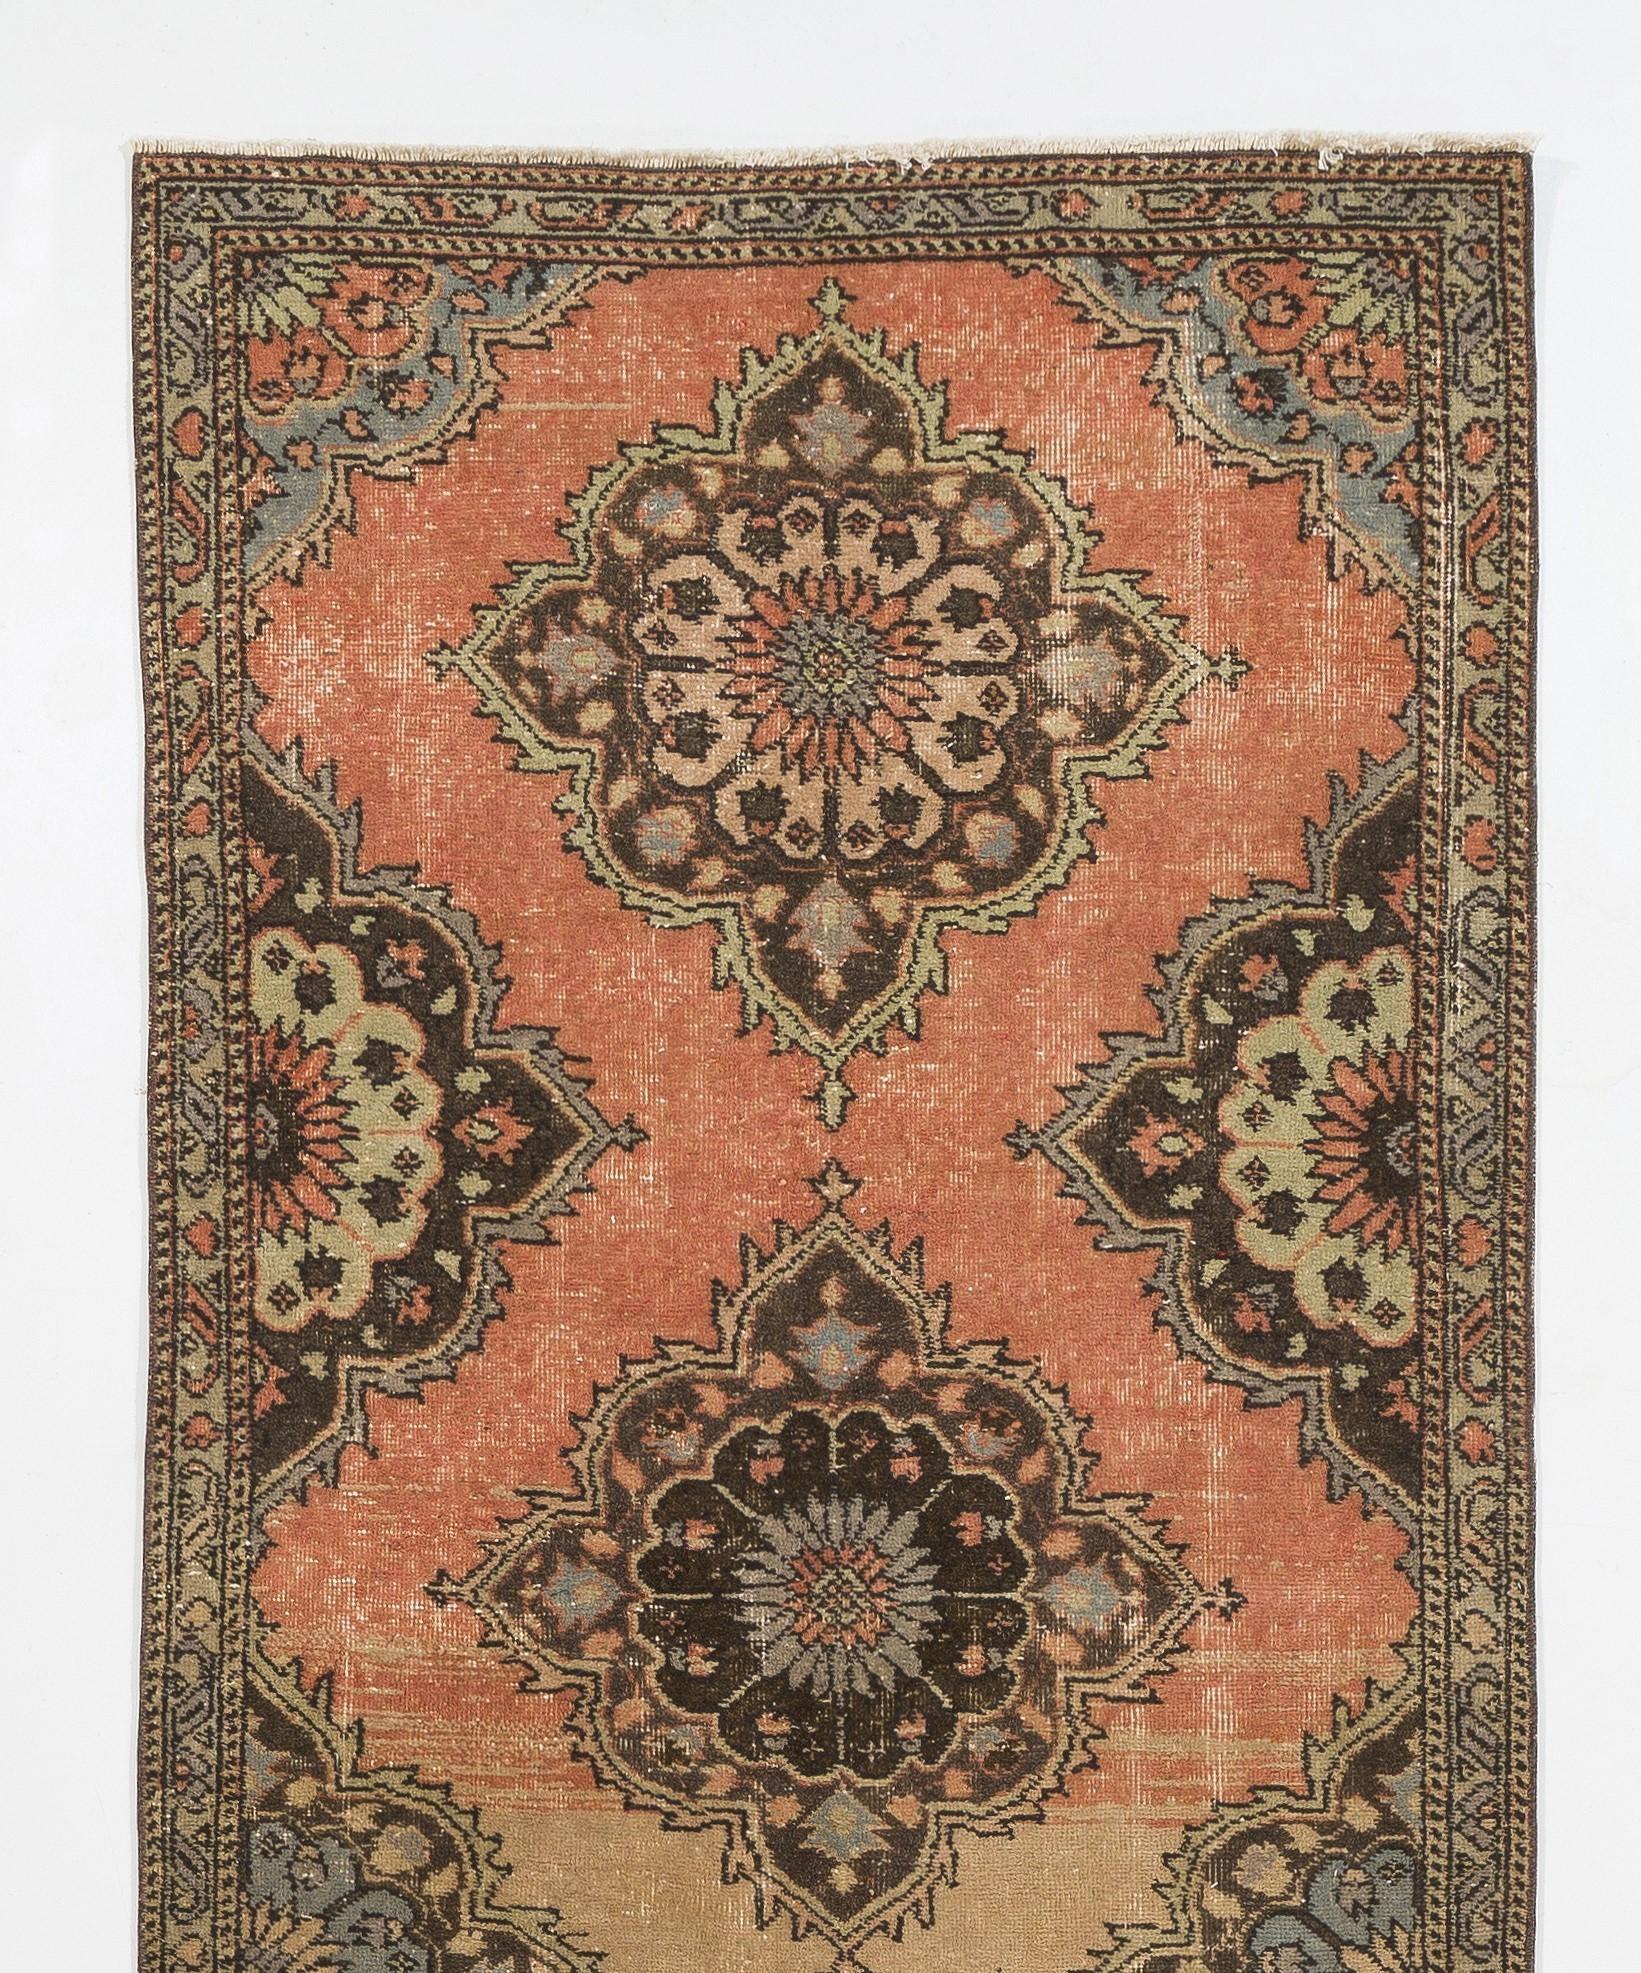 An early 20th century hand knotted runner from Central Anatolia with pleasing natural colors and wool pile on wool foundation.

Good condition, sturdy and as clean as a brand new rug. 
Measures: 3.6 x 11.7.